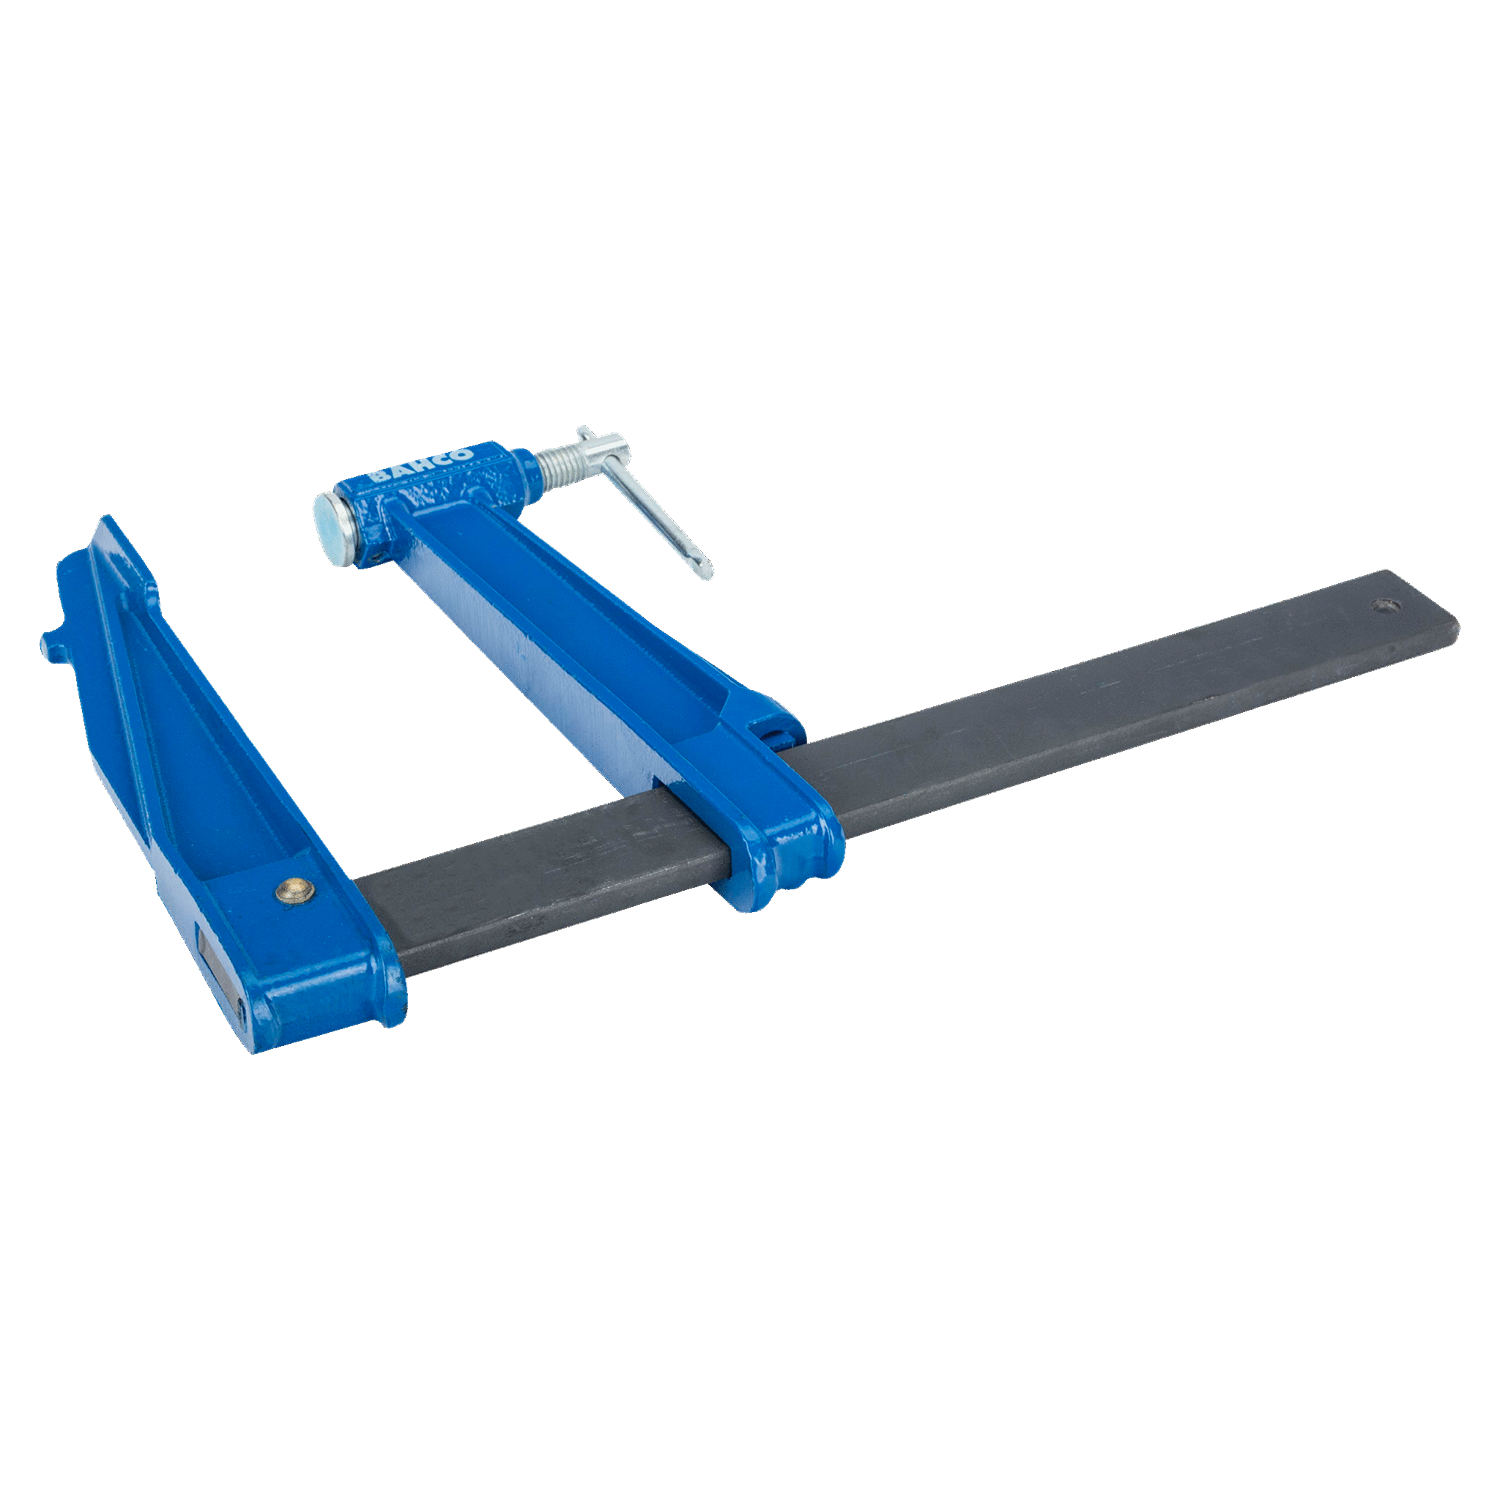 BAHCO 3069 F-Clamp with Steel T-Handle 220 mm (BAHCO Tools) - Premium F-Clamp from BAHCO - Shop now at Yew Aik.